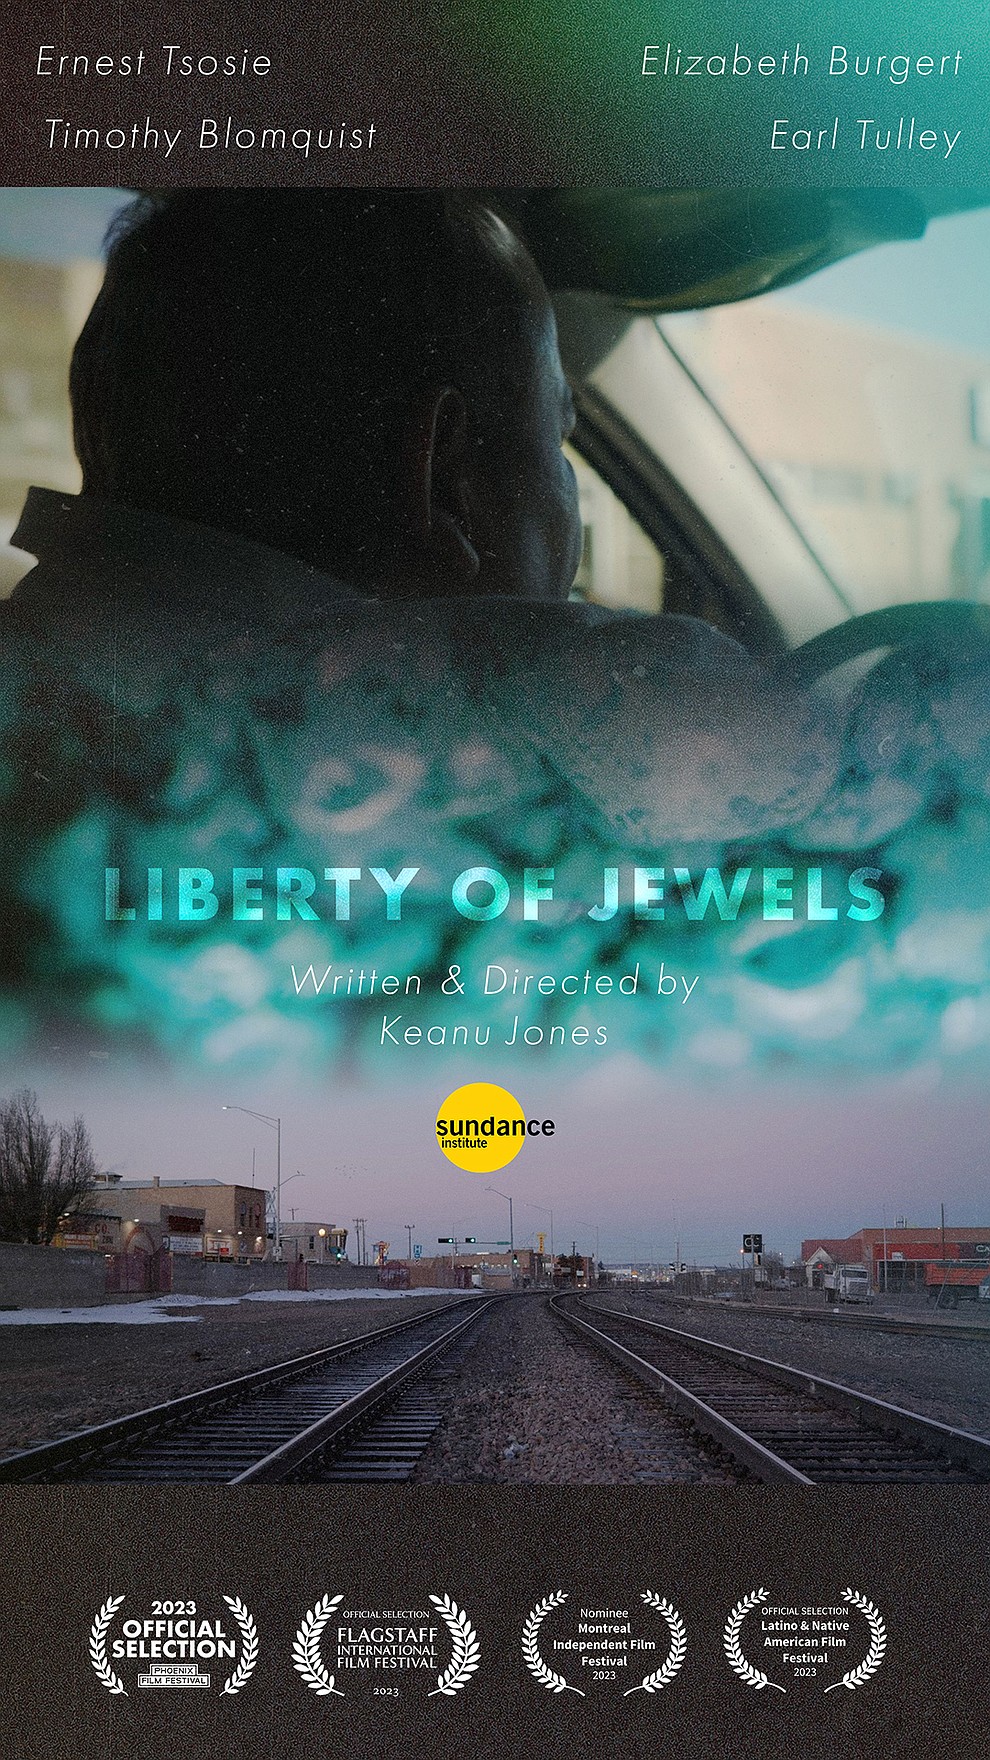 Liberty of Jewels
Run Time: 12 minutes / Narrative
Director/Writer: Keanu Jones
Cast: Ernest David Tsosie, Timothy Blomquist, Elizabeth Burgert, Earl Tulley
Gilbert Etsitty, a financially strained Navajo father, works in Gallup, New Mexico as a clerk for Jeff’s Trading Post. He is tested by his employer, Jeff, who is a manipulative boss that forces Gilbert to gain autonomy for the survival of his daughter’s relationship.